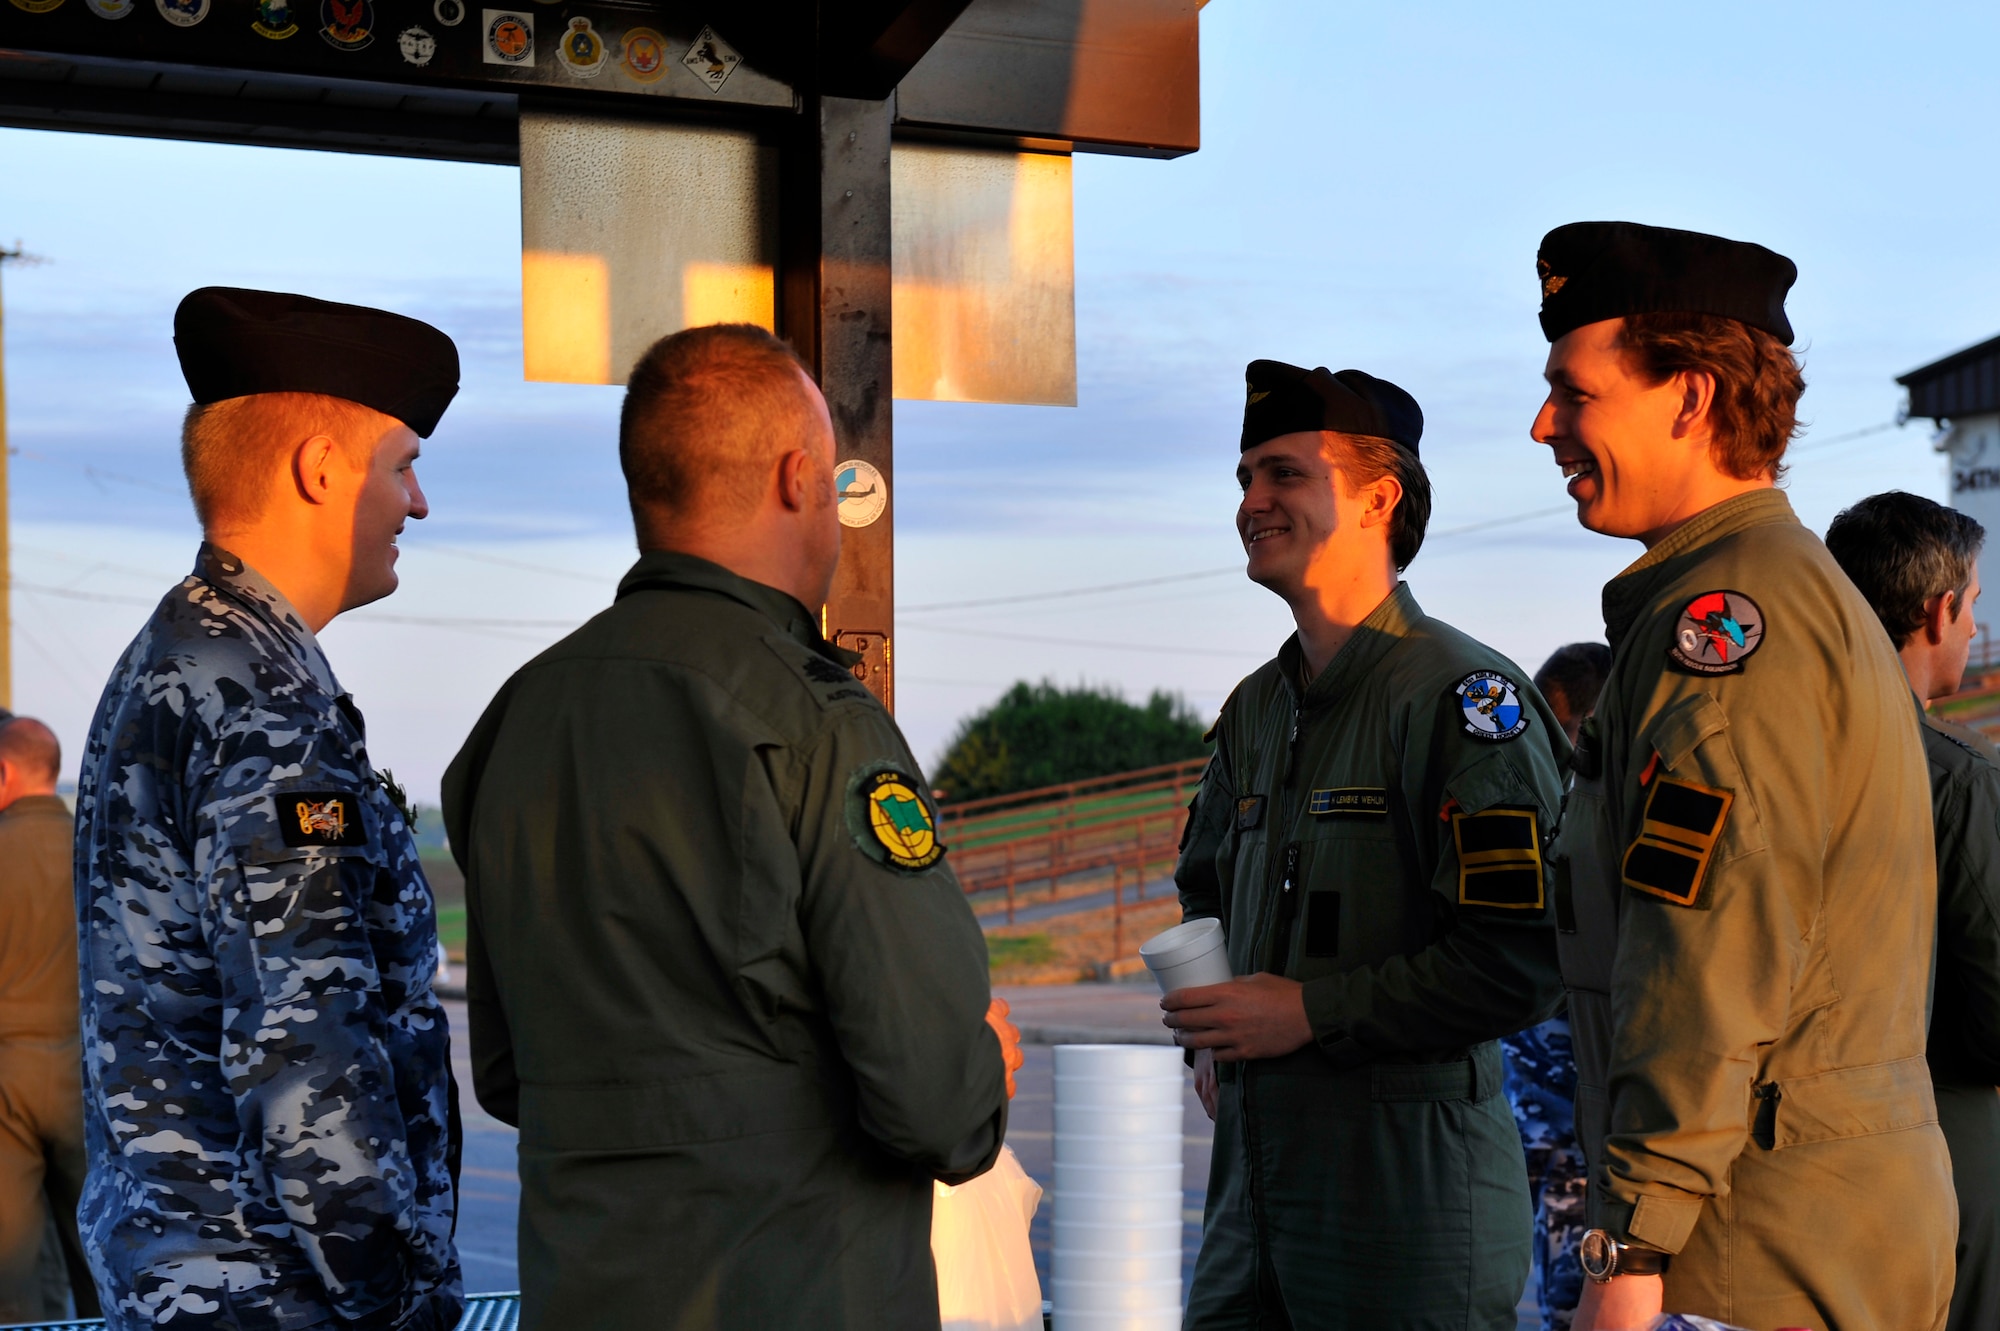 Australian and Swedish Air Force personnel celebrate Australian and New Zealand Army Corps Day over a “gun fire breakfast” April 25, 2016, at Little Rock Air Force Base. A “gun fire breakfast” is an Australian tradition consisting of coffee mixed with nipper rum drank by Word War I Australian soldiers to calm their nerves before battle. (U.S. Air Force photo by Airman Kevin Sommer Giron)